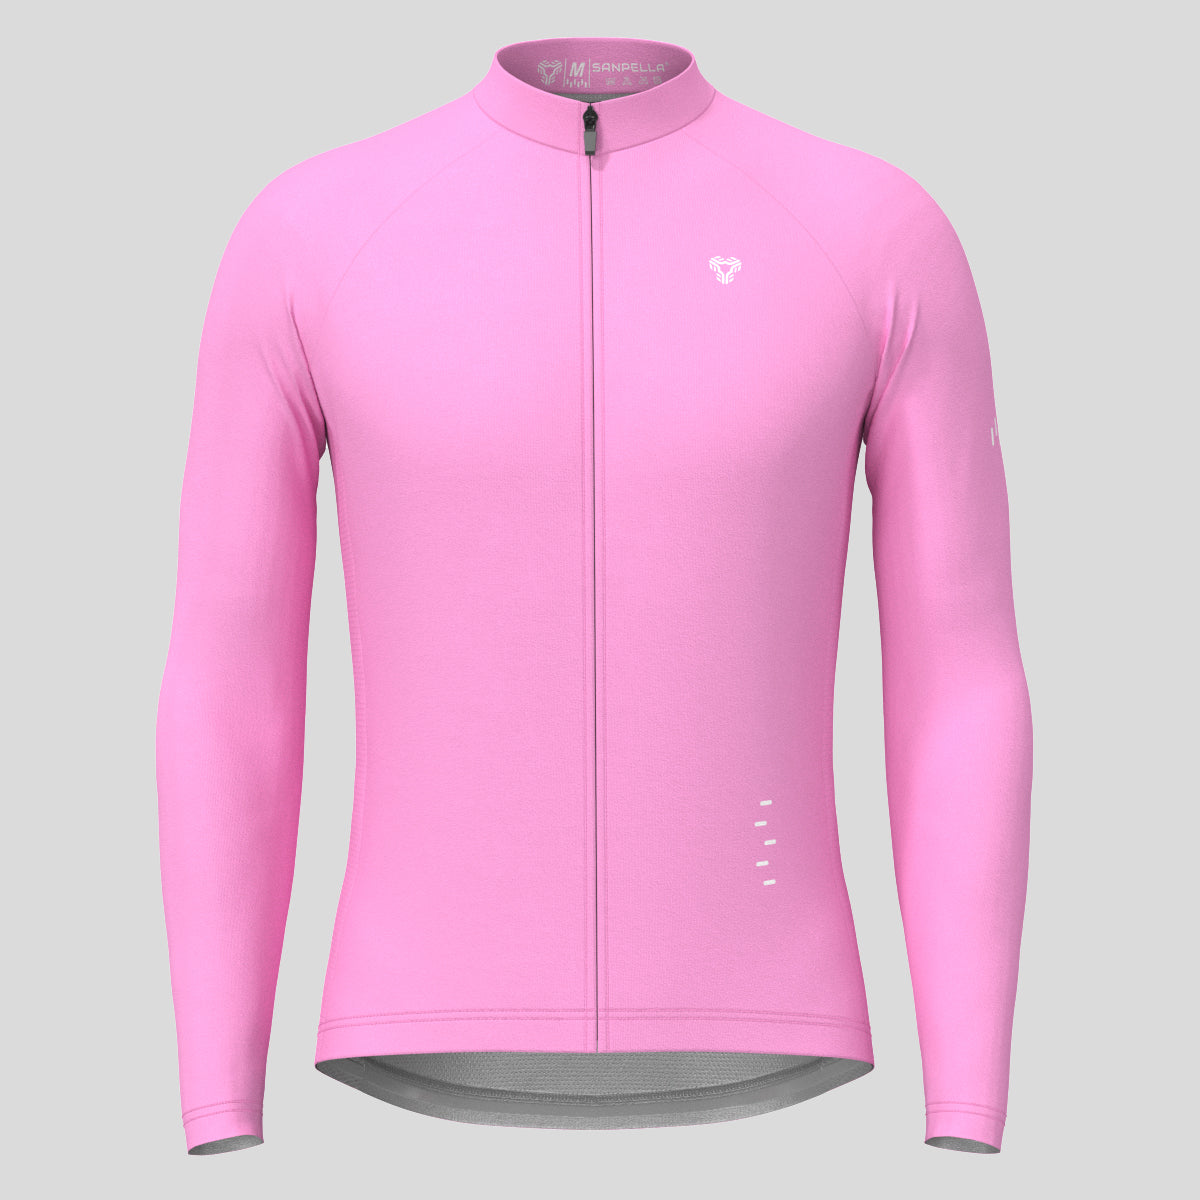 Men's Minimal Solid LS Cycling Jersey - Neo Pink